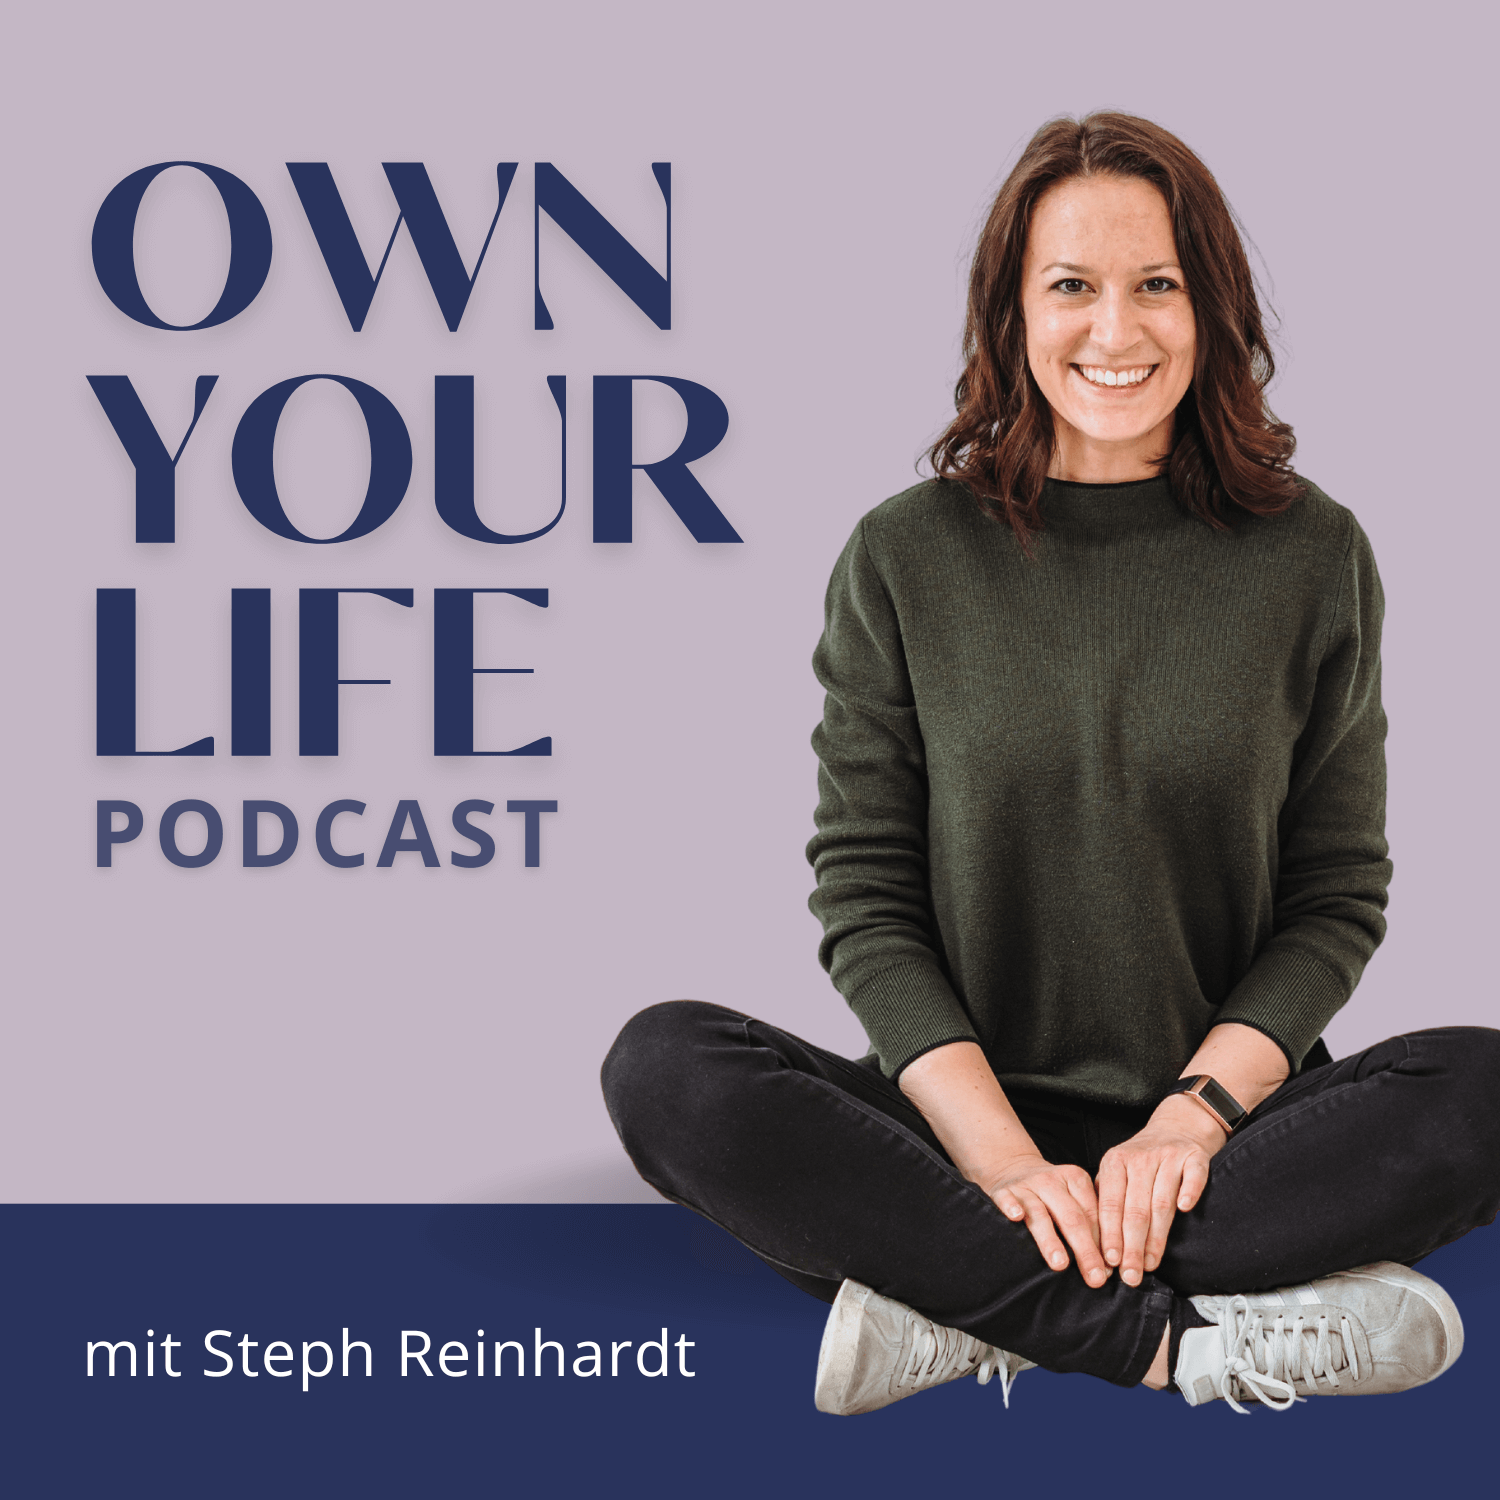 Own your Life Podcast mit Steph Reinhardt | Cover